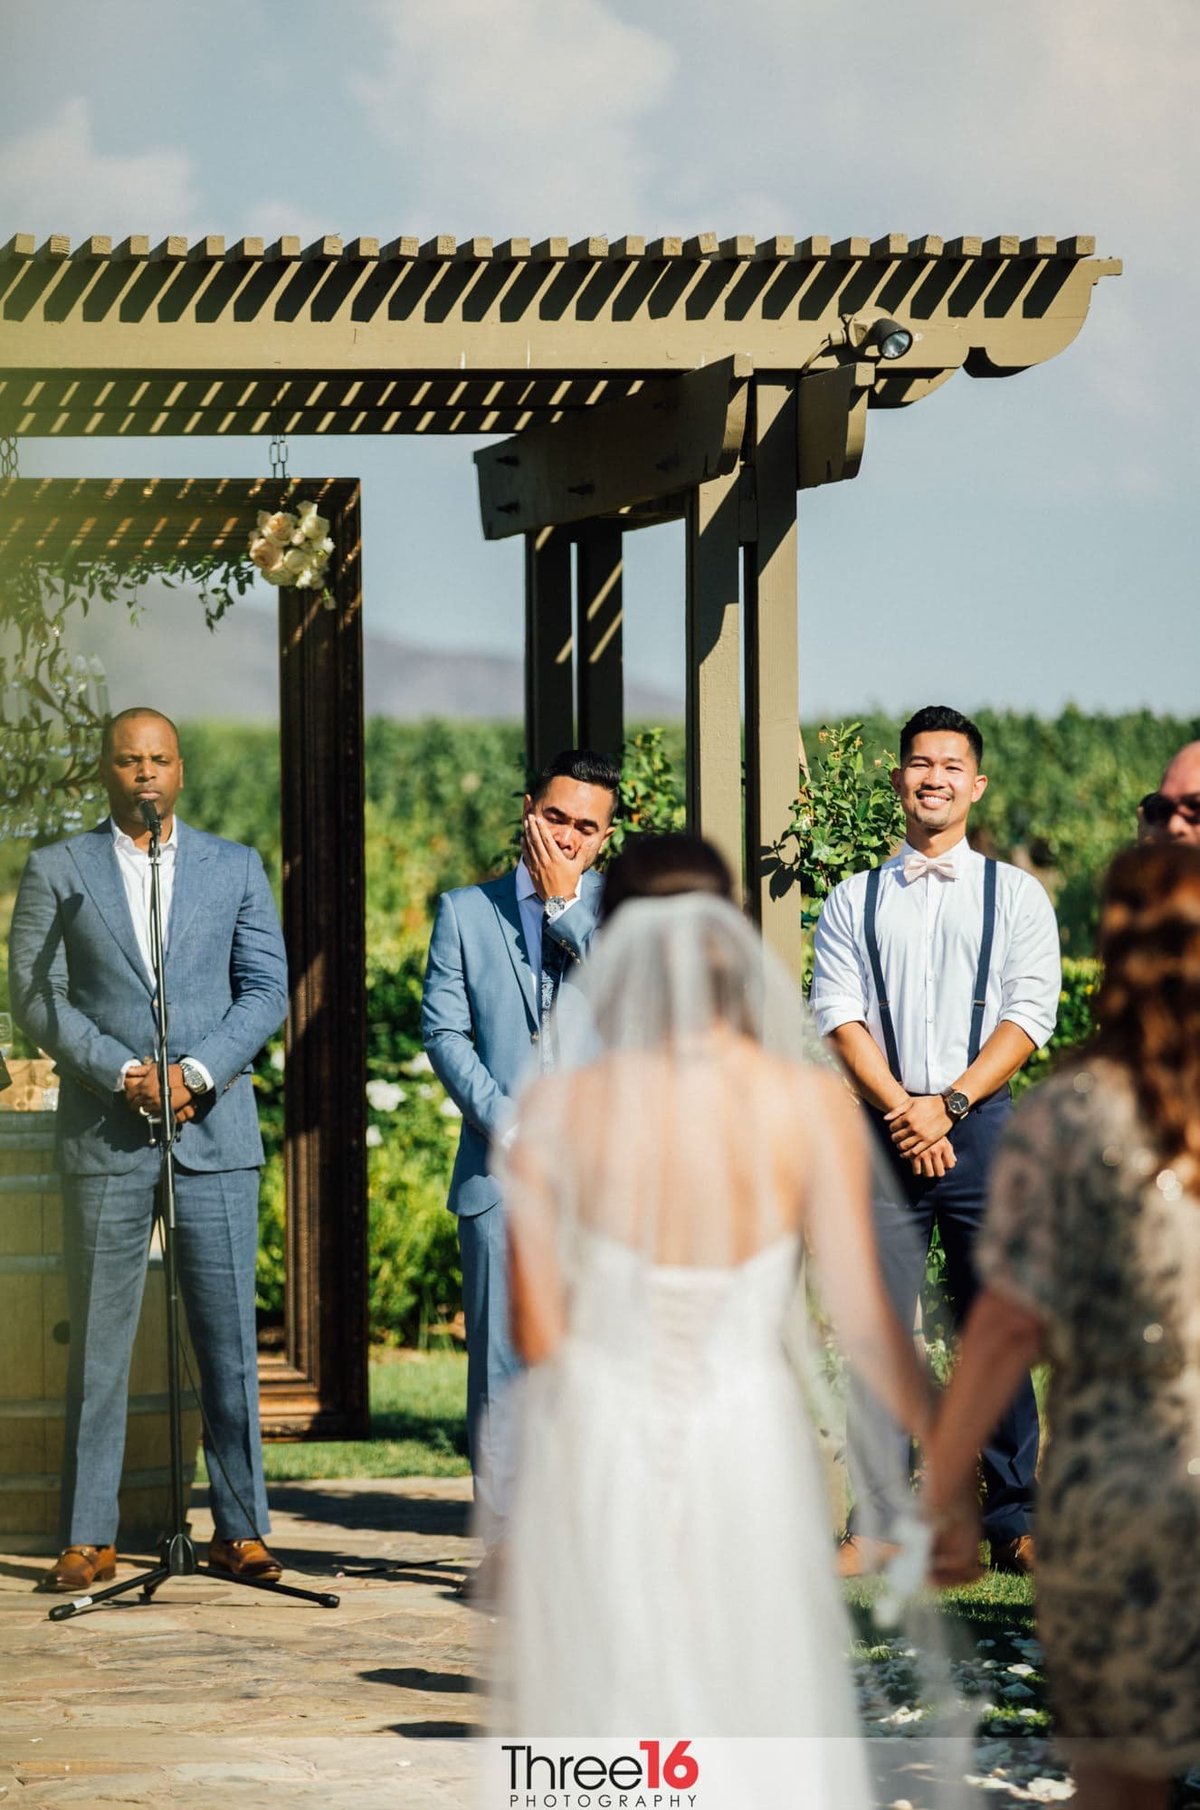 Groom fights back tears as his Bride is walking up the aisle